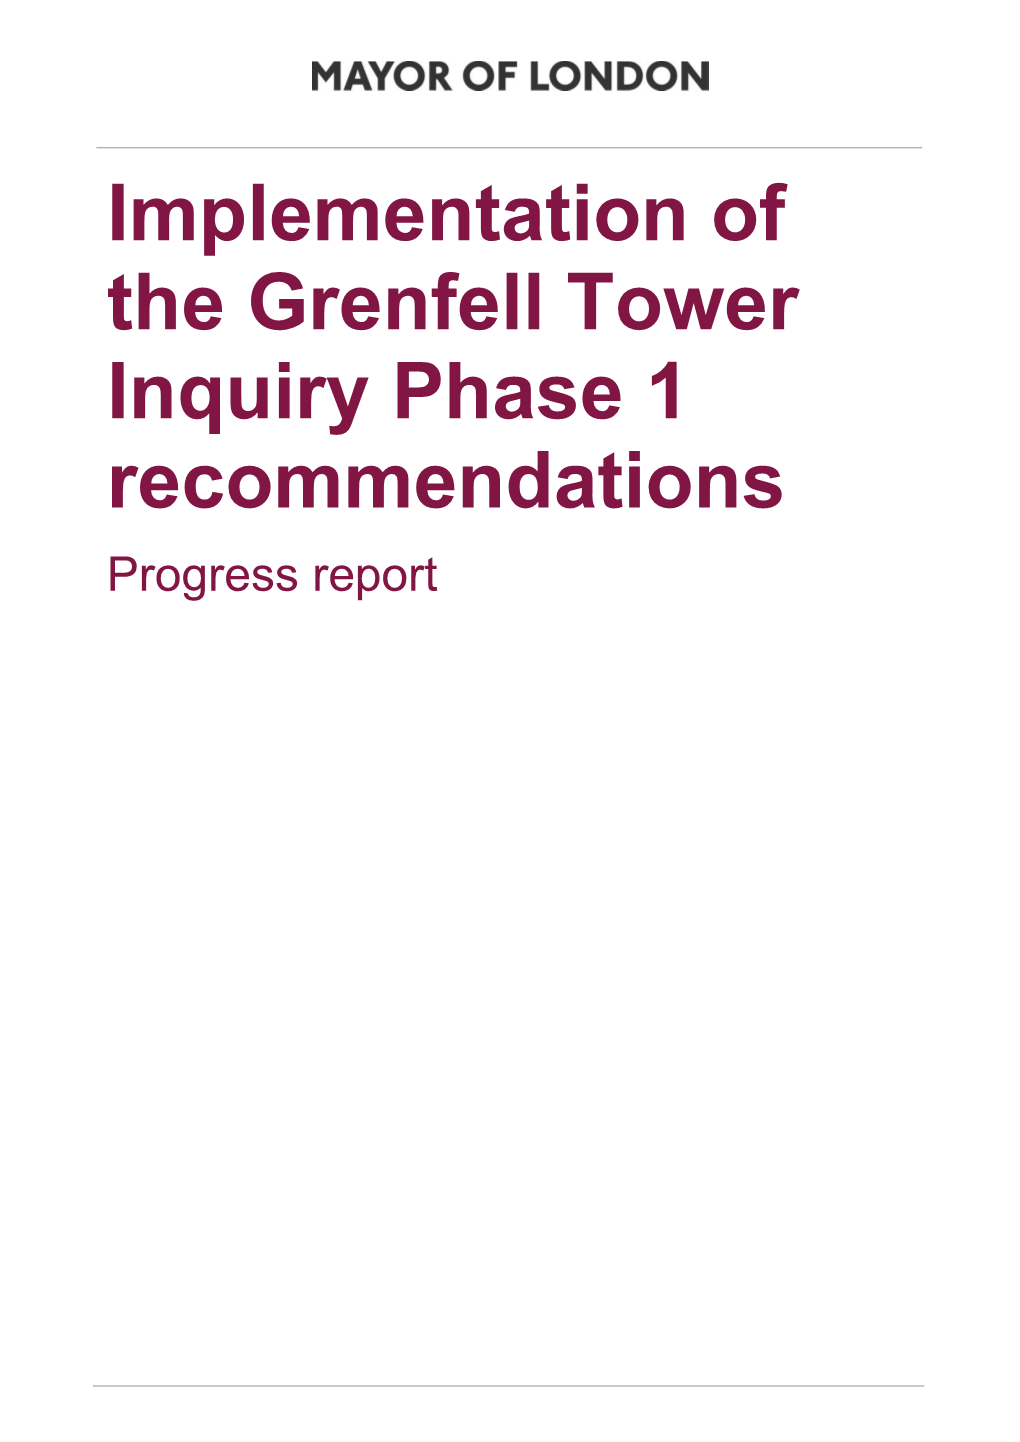 Implementation of the Grenfell Tower Inquiry Phase 1 Recommendations Progress Report